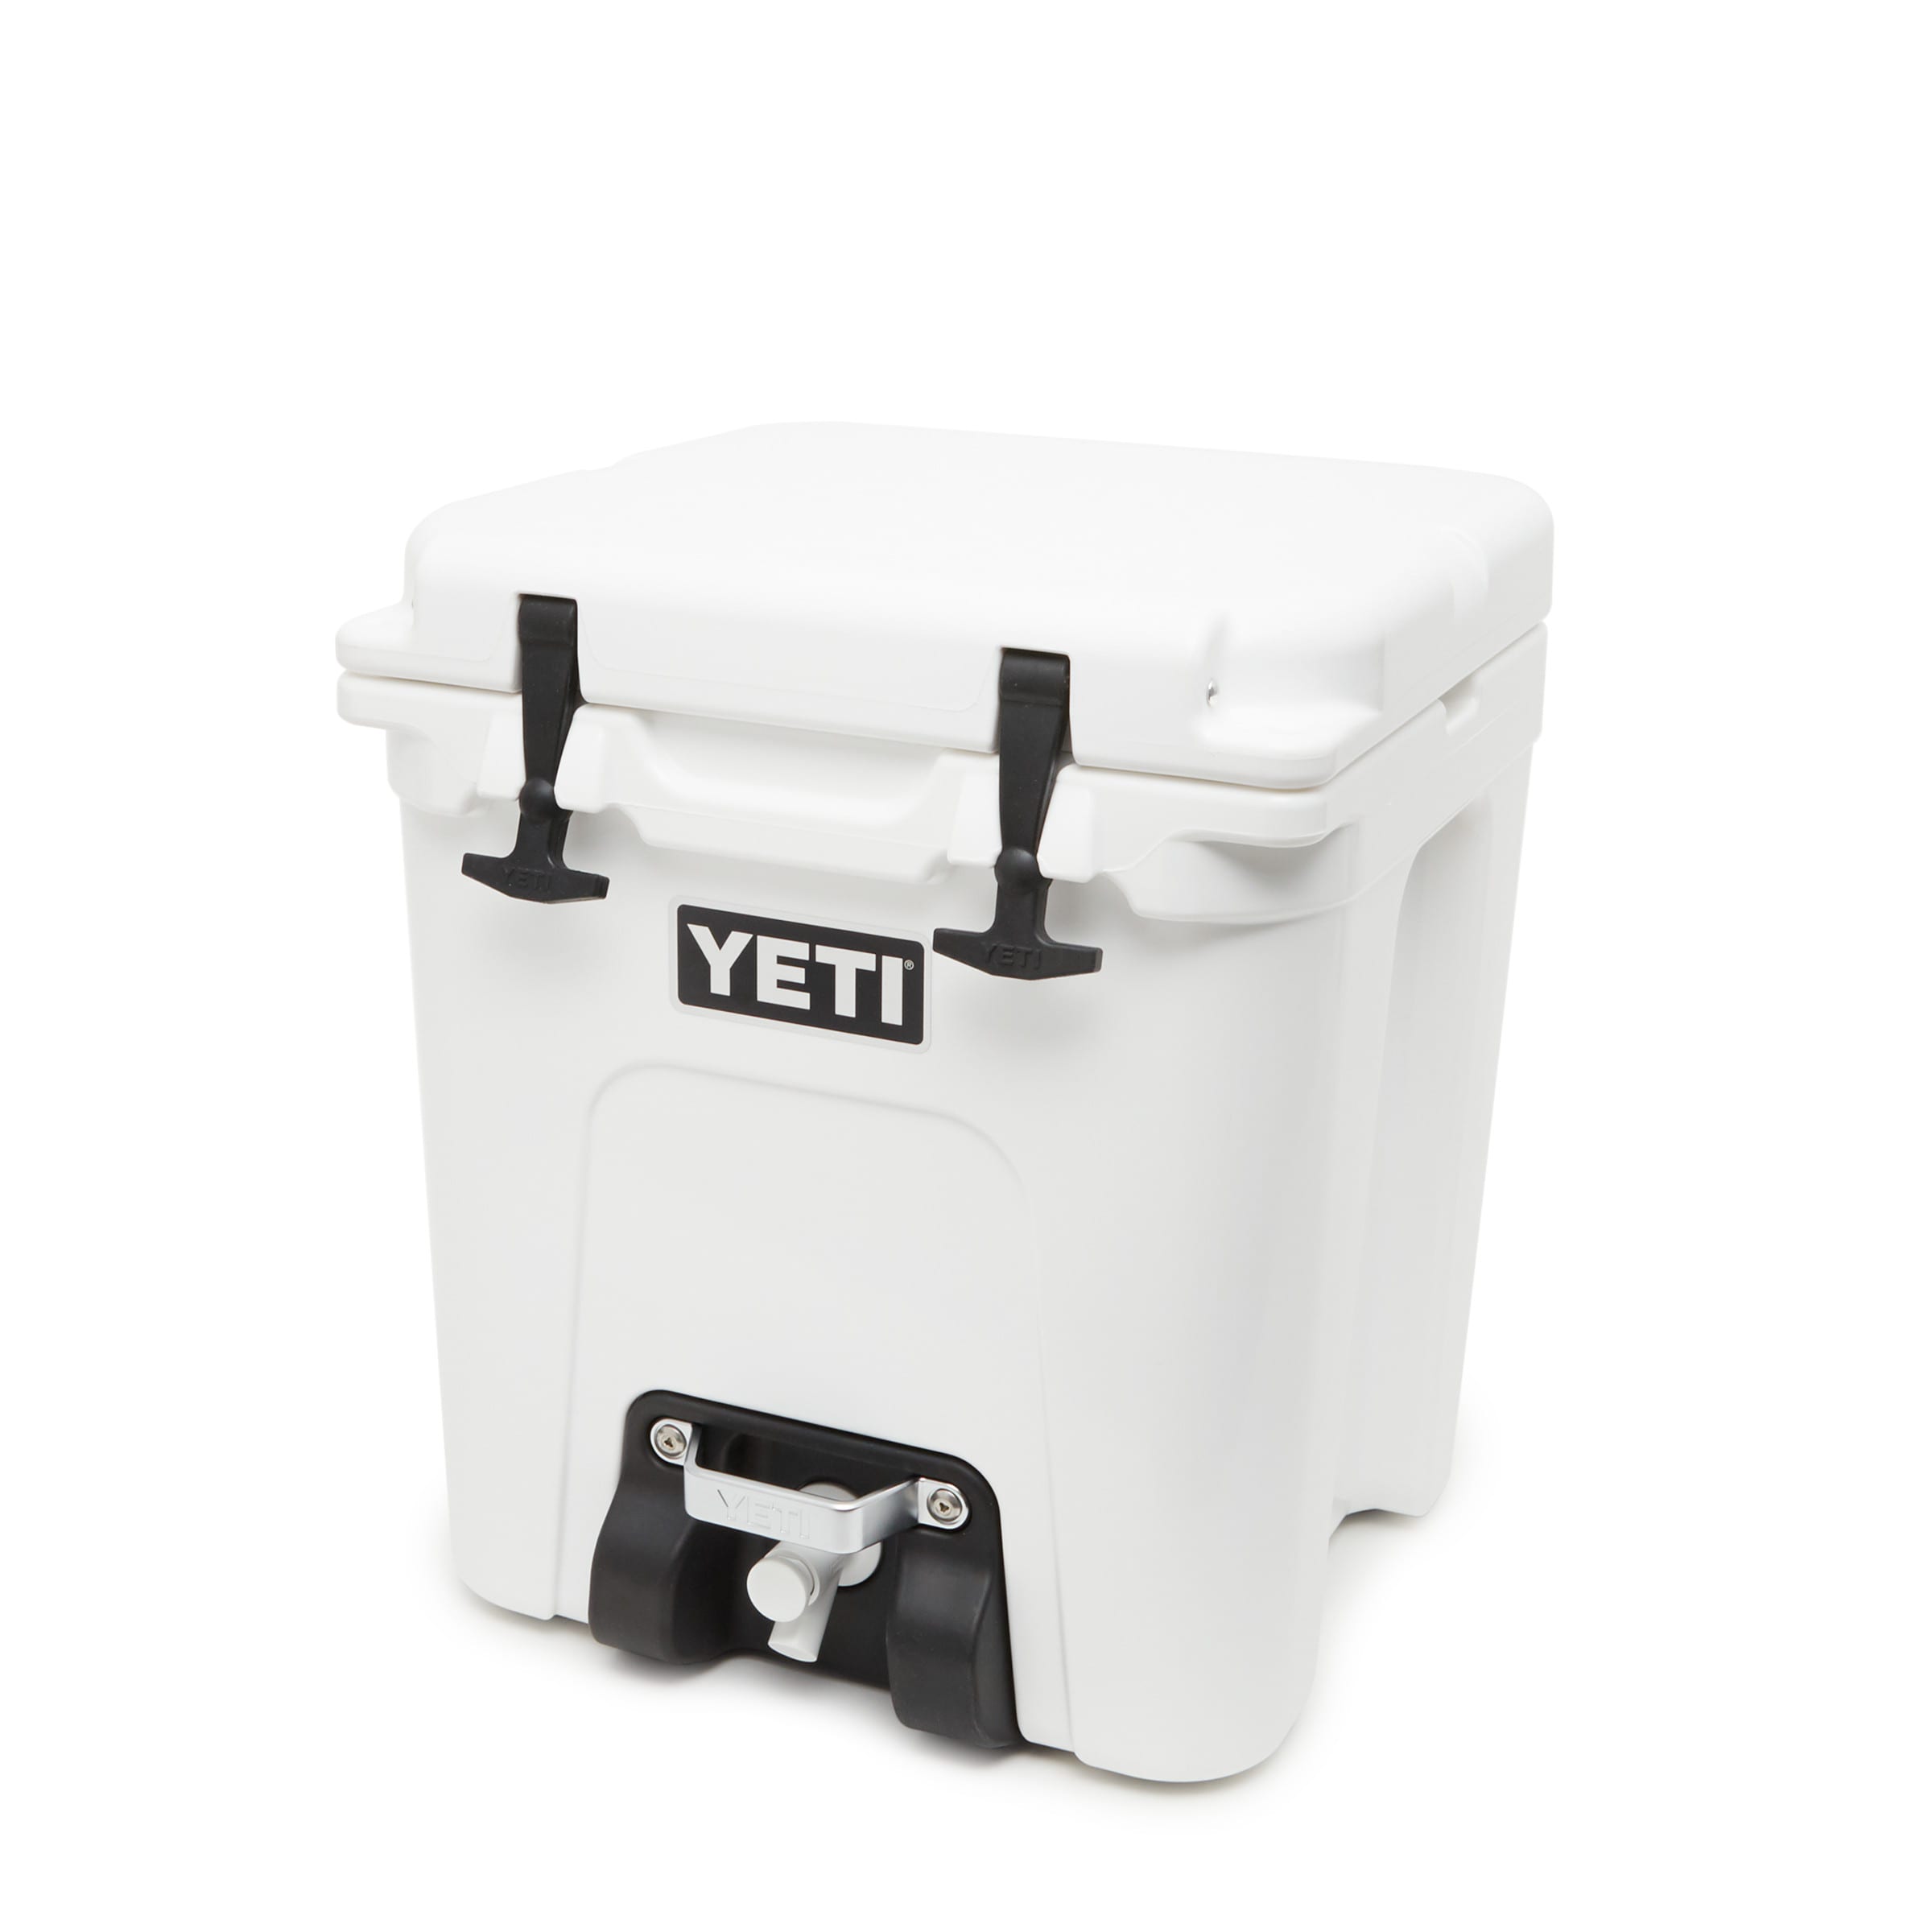 YETI Coolers - Replacement Load-and-Lock Gasket for Rambler